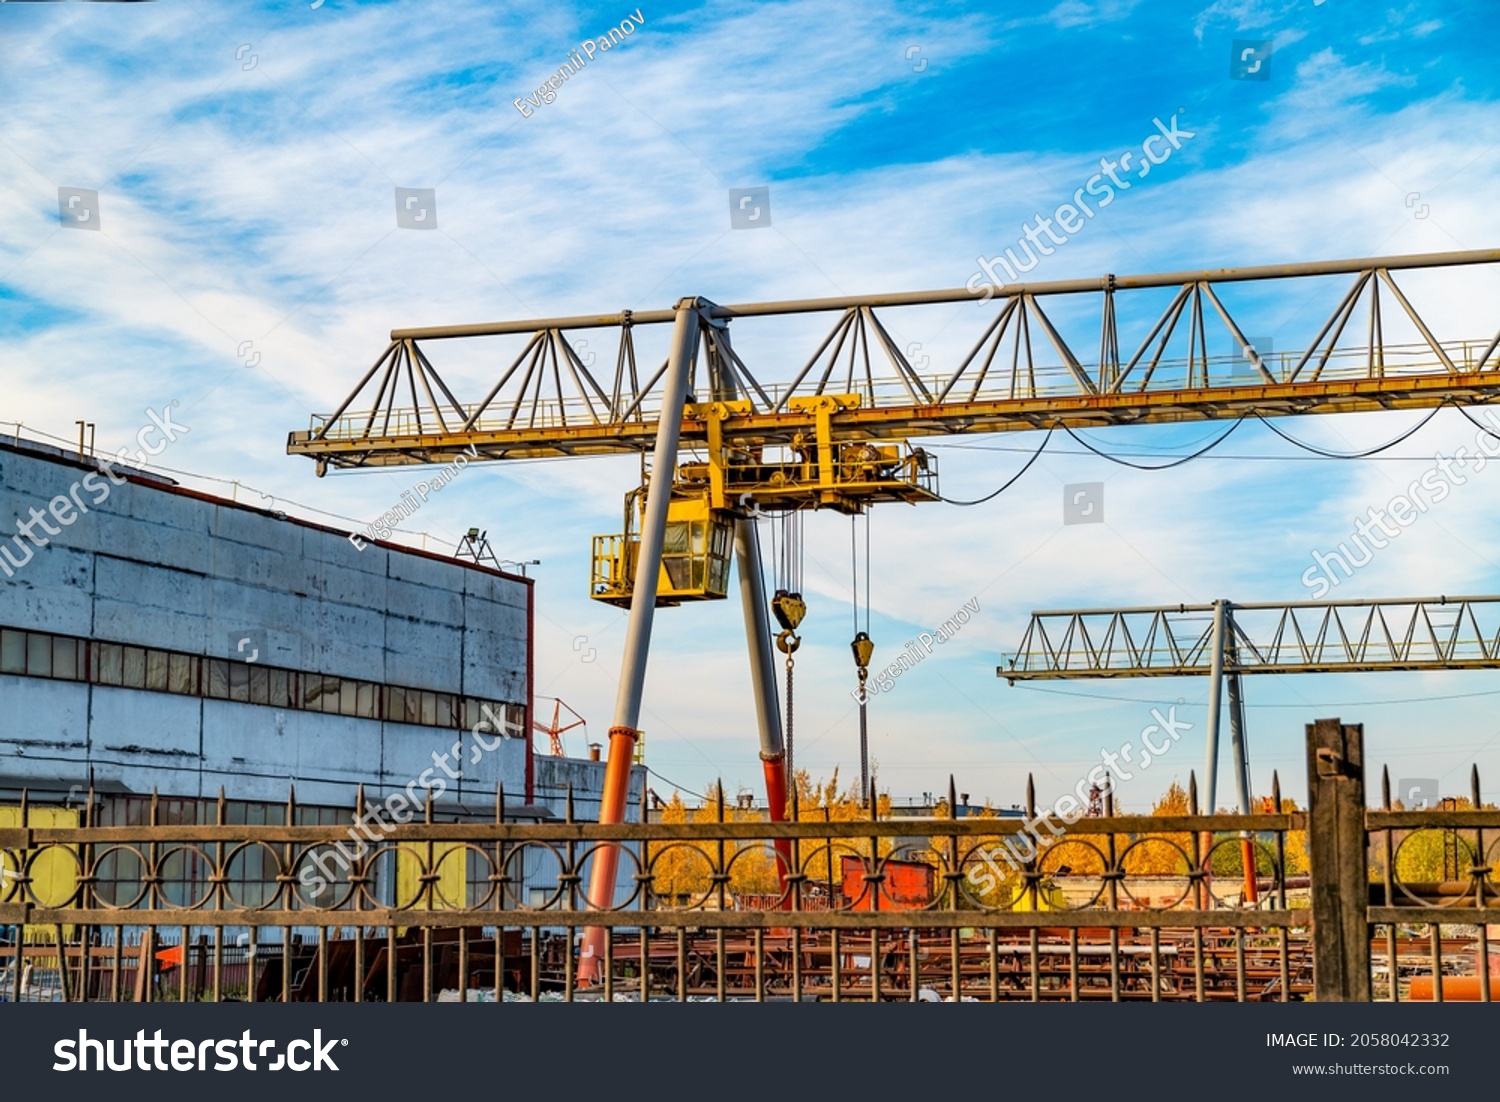 Cargo cranes at an industrial plant loads heavy goods and containers. The concept of logistics and business for the transportation and delivery of goods by sea, road and rail. #2058042332